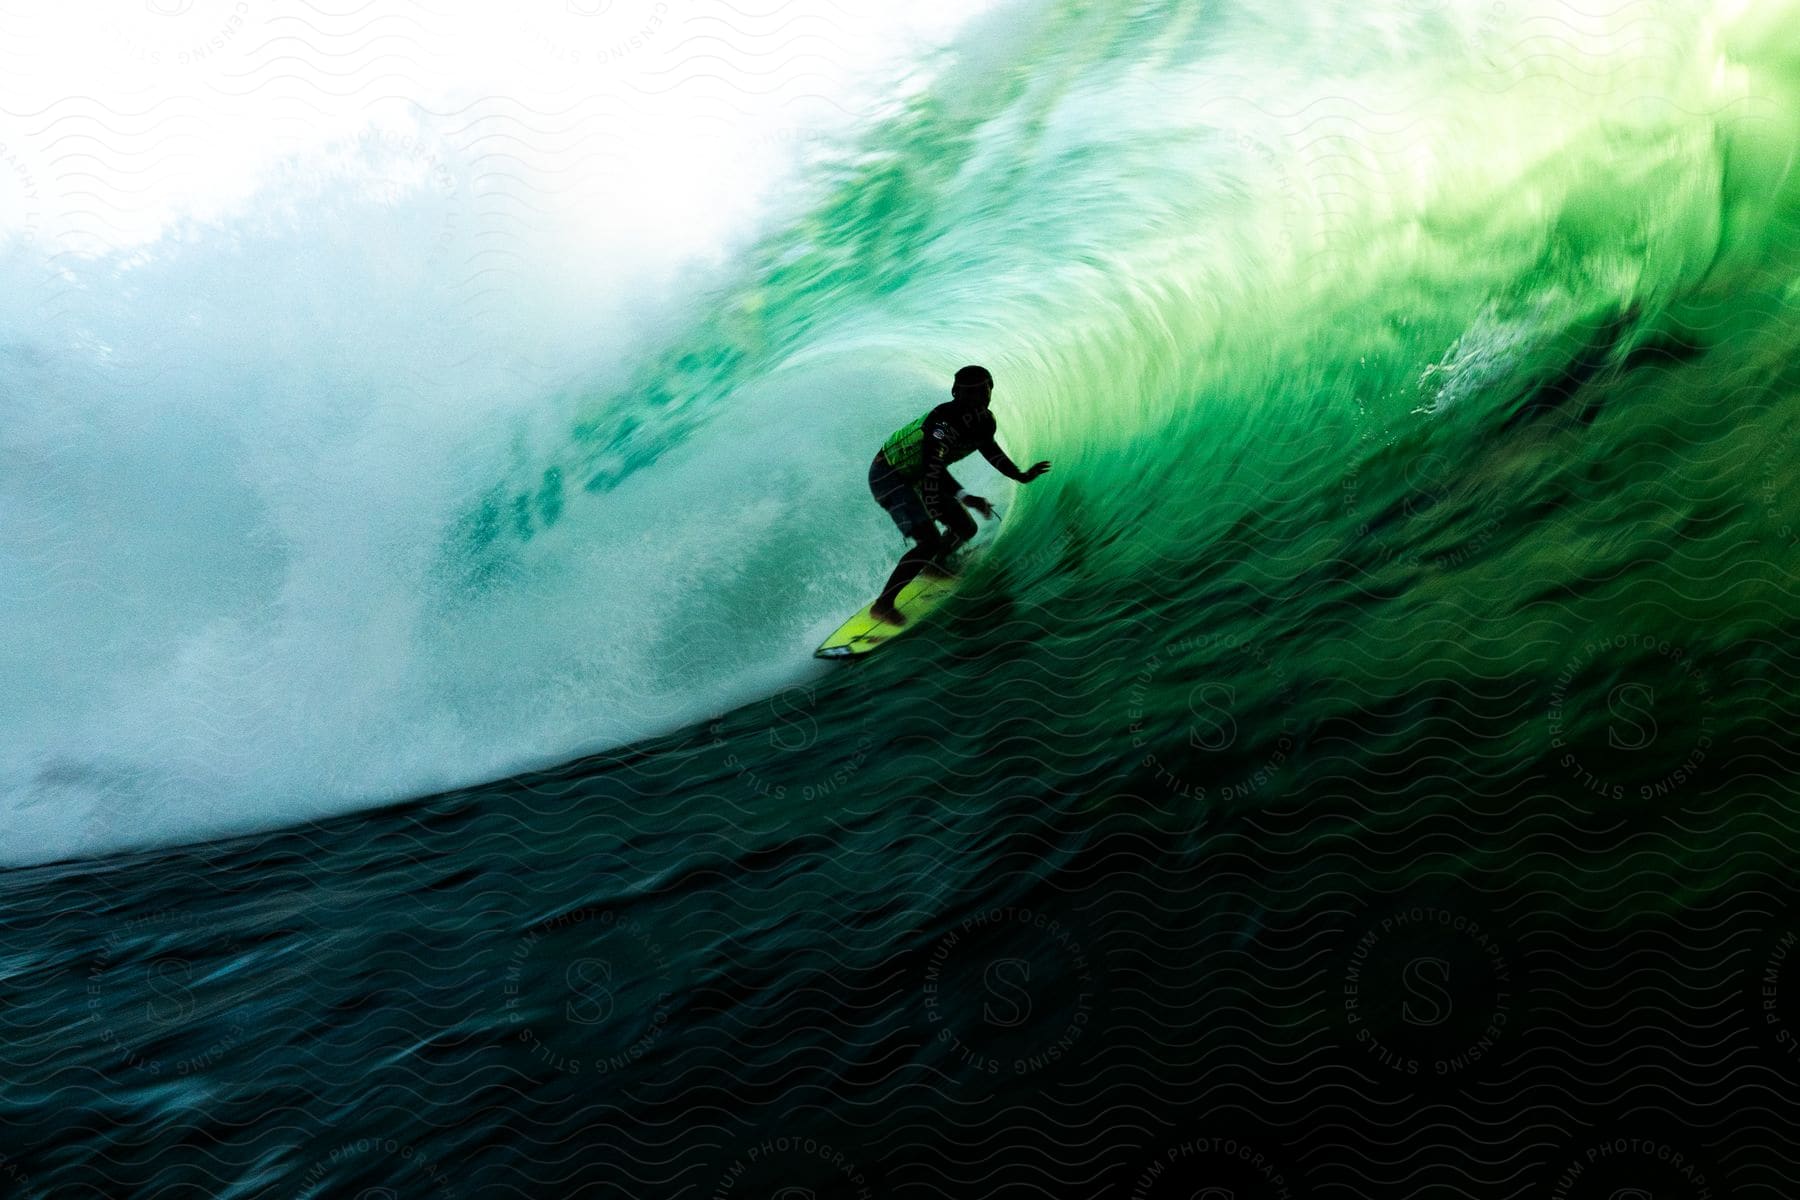 A person is surfing a large wave that is light on top and dark on the bottom